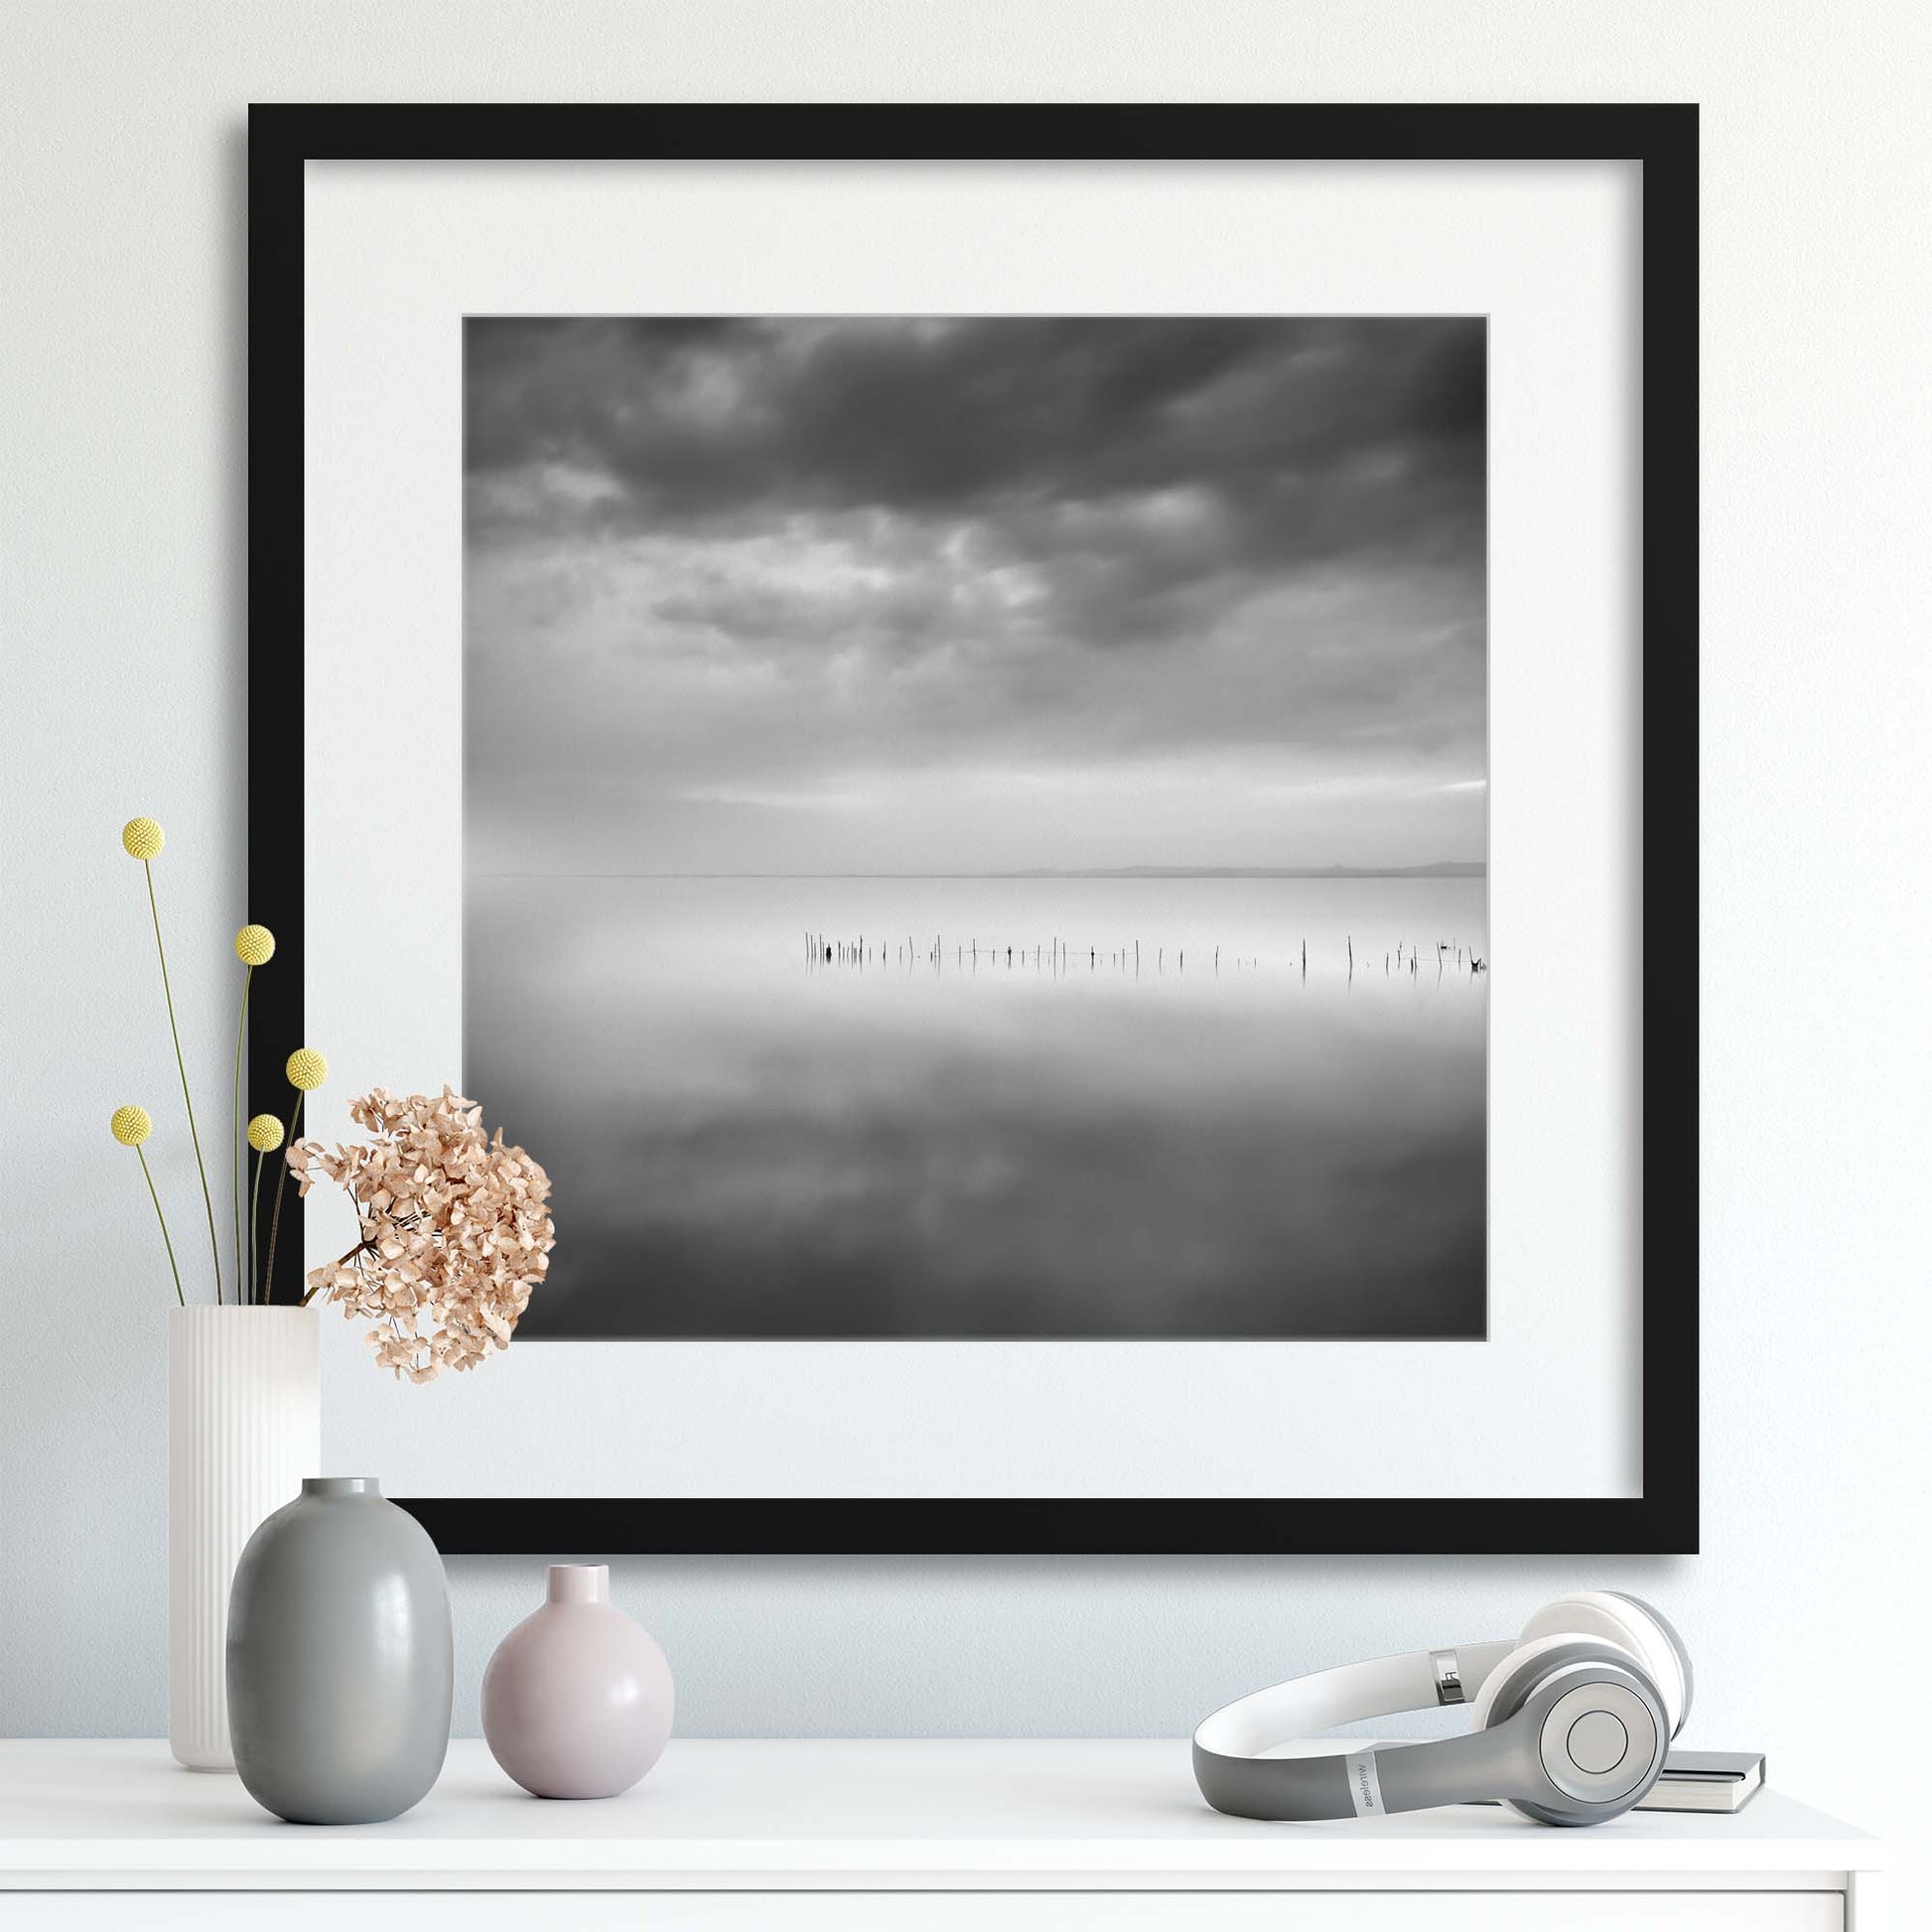 Sixty Shades of Gray by George Digalakis Framed Print - USTAD HOME